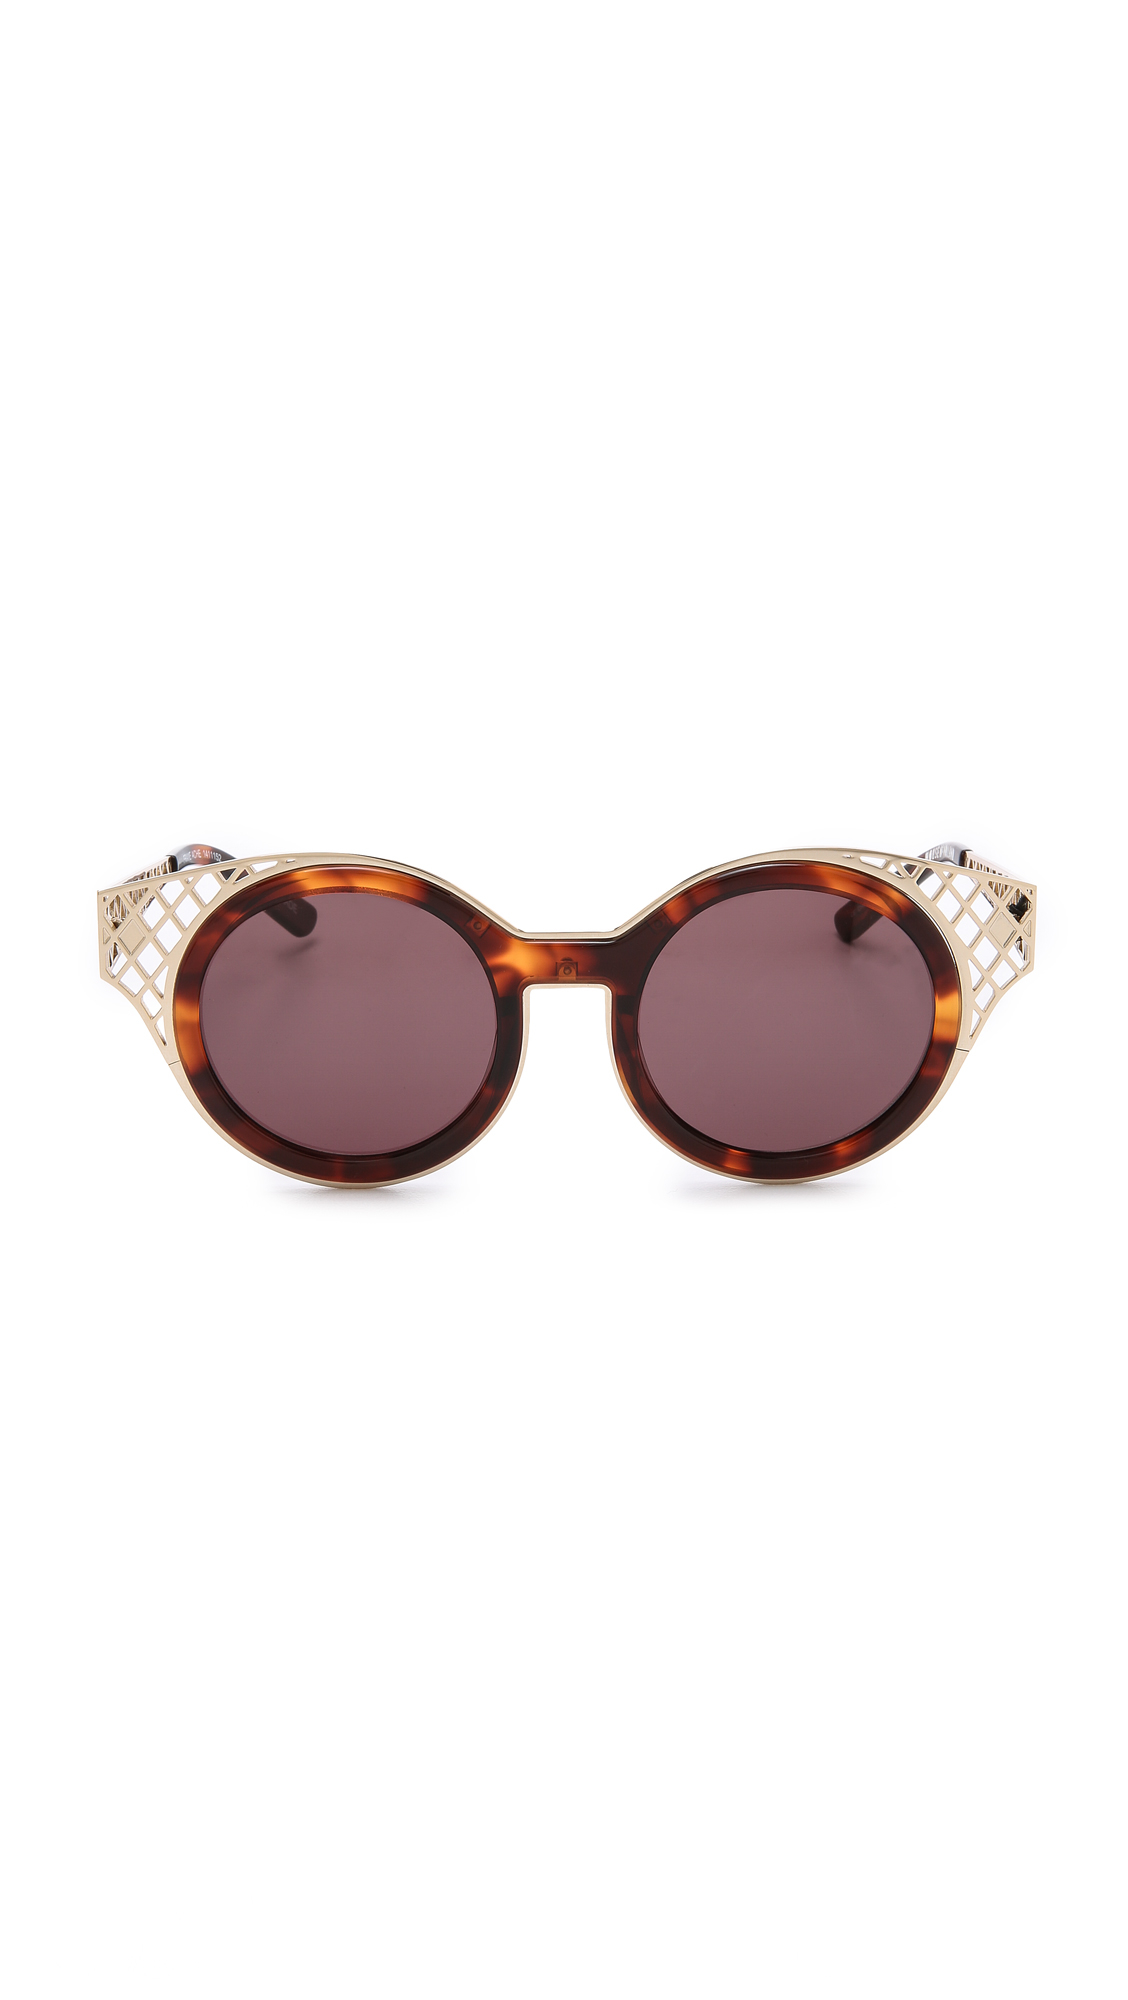 Lyst - House Of Holland Frame Ache Sunglasses in Brown